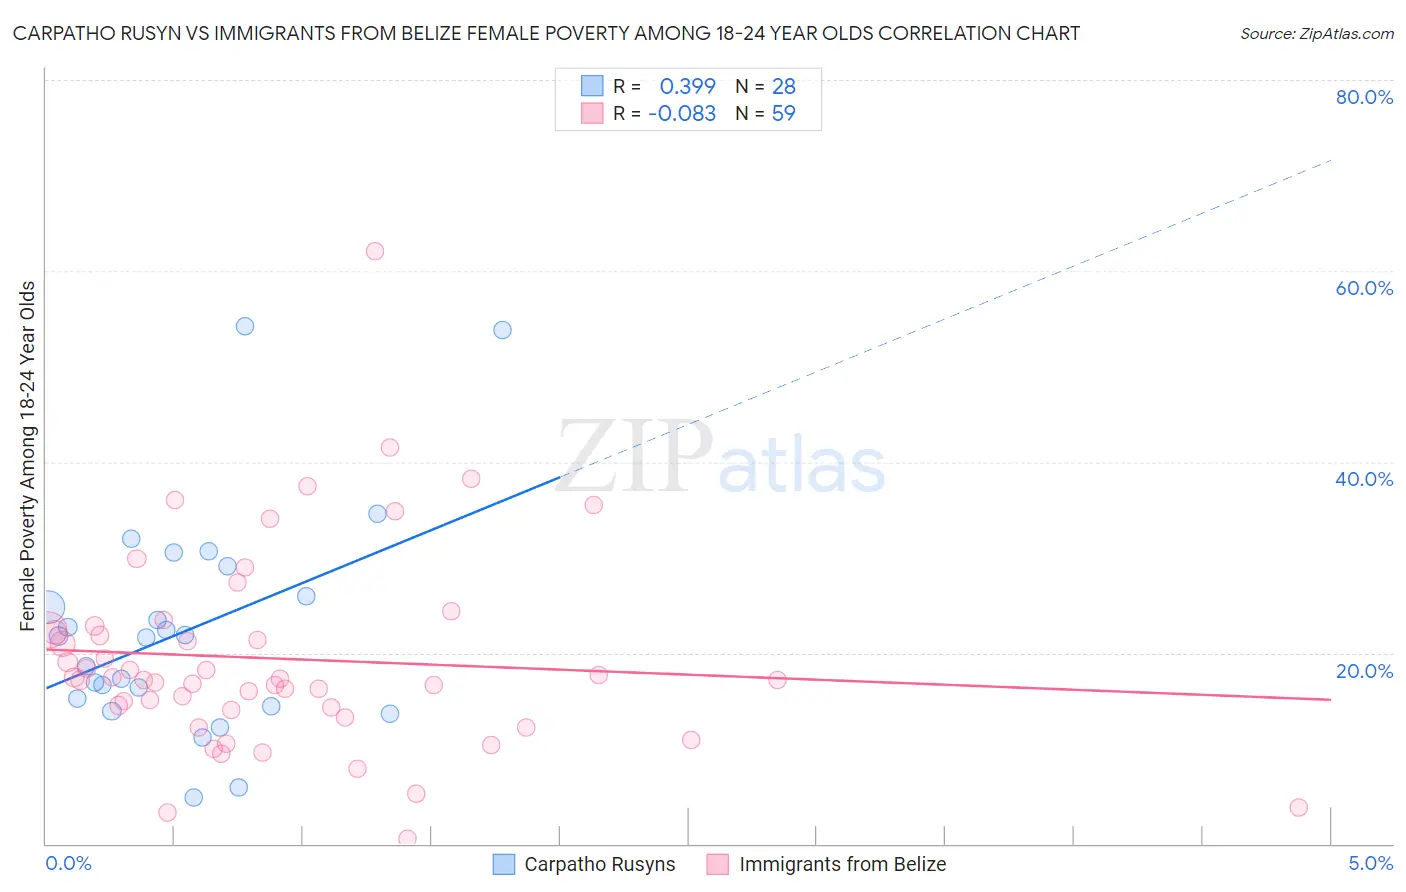 Carpatho Rusyn vs Immigrants from Belize Female Poverty Among 18-24 Year Olds